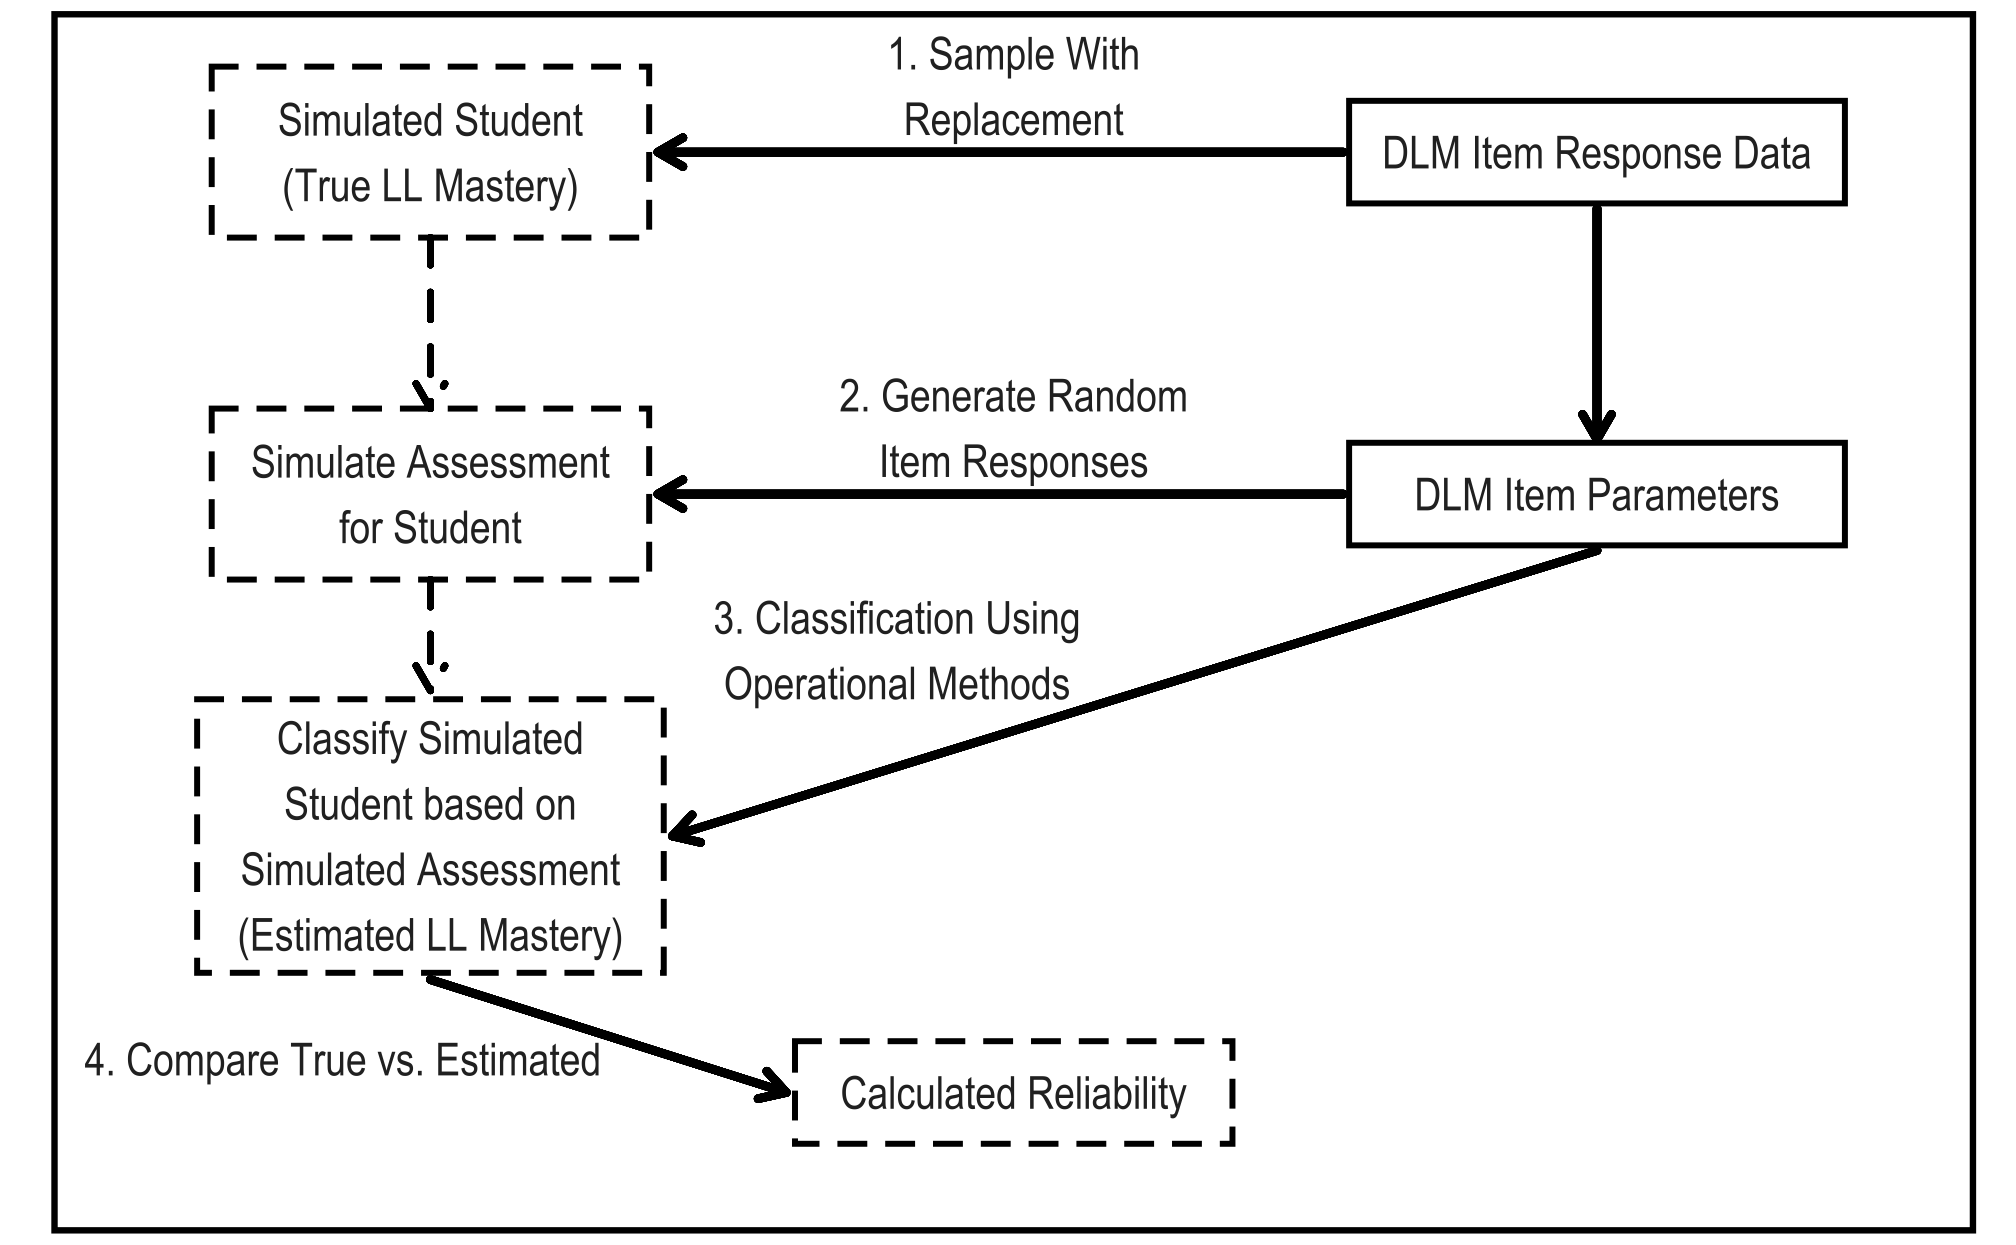 Flowchart showing the simulated retest process described in the text.